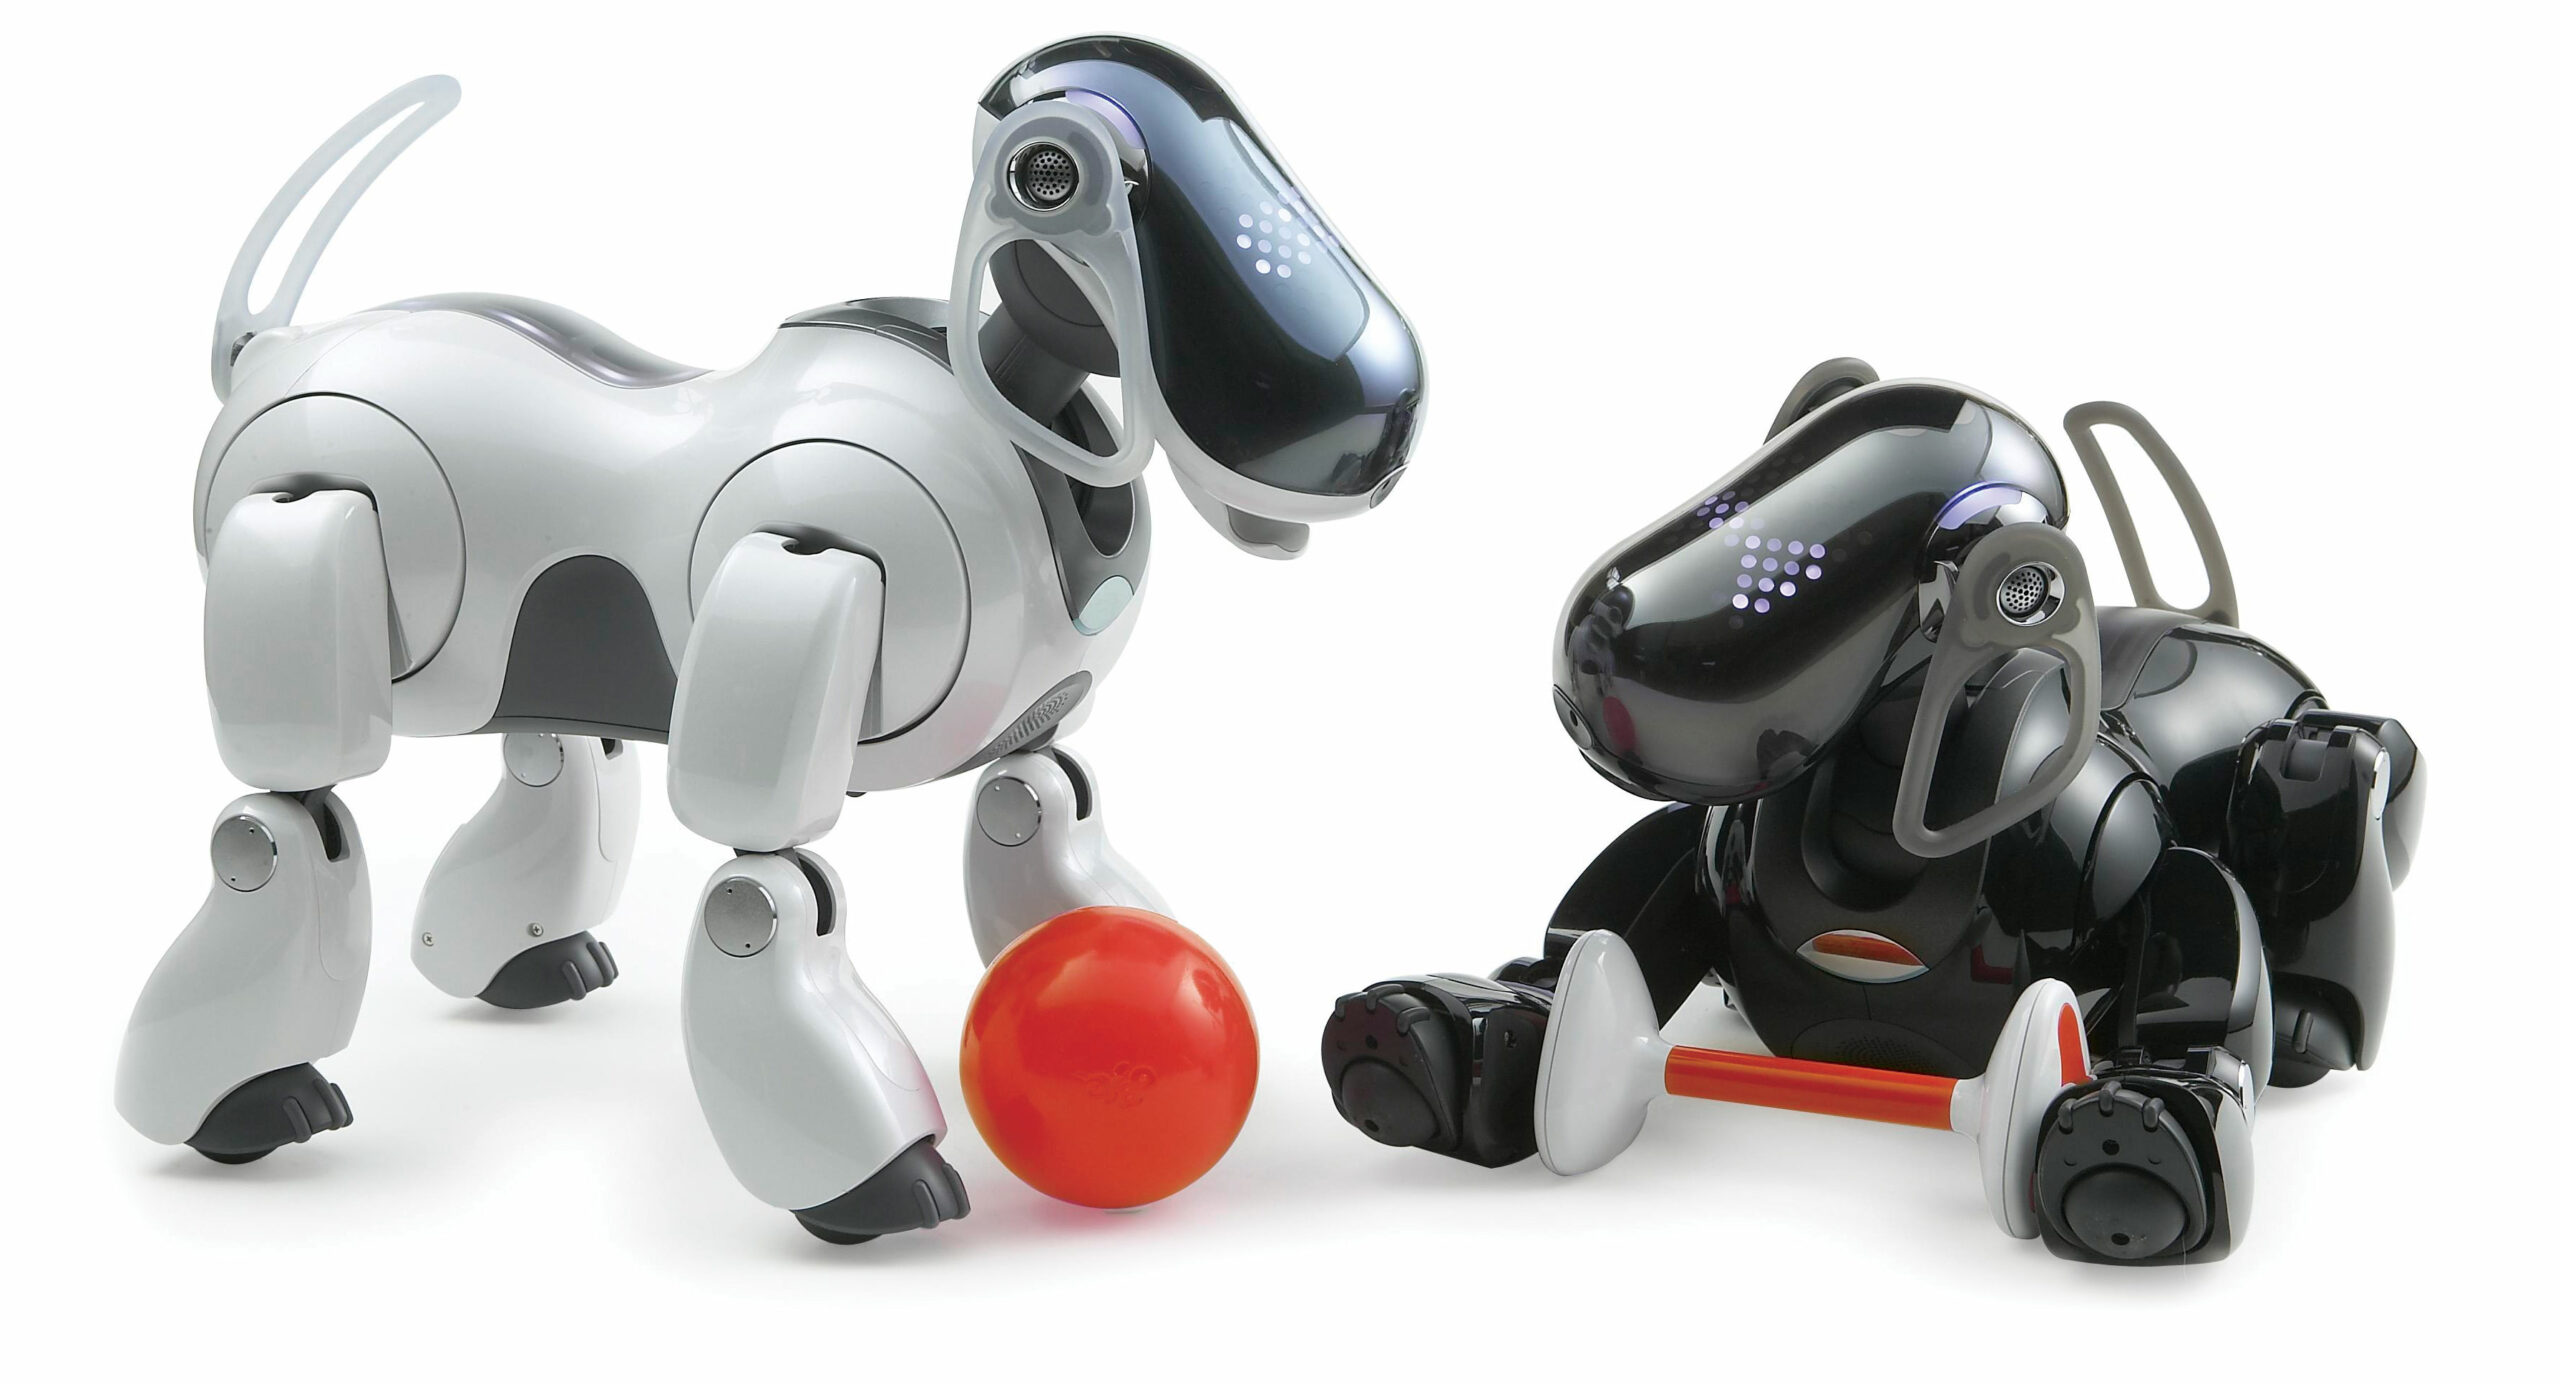 Robot Pets Have a Leg Up on Fido